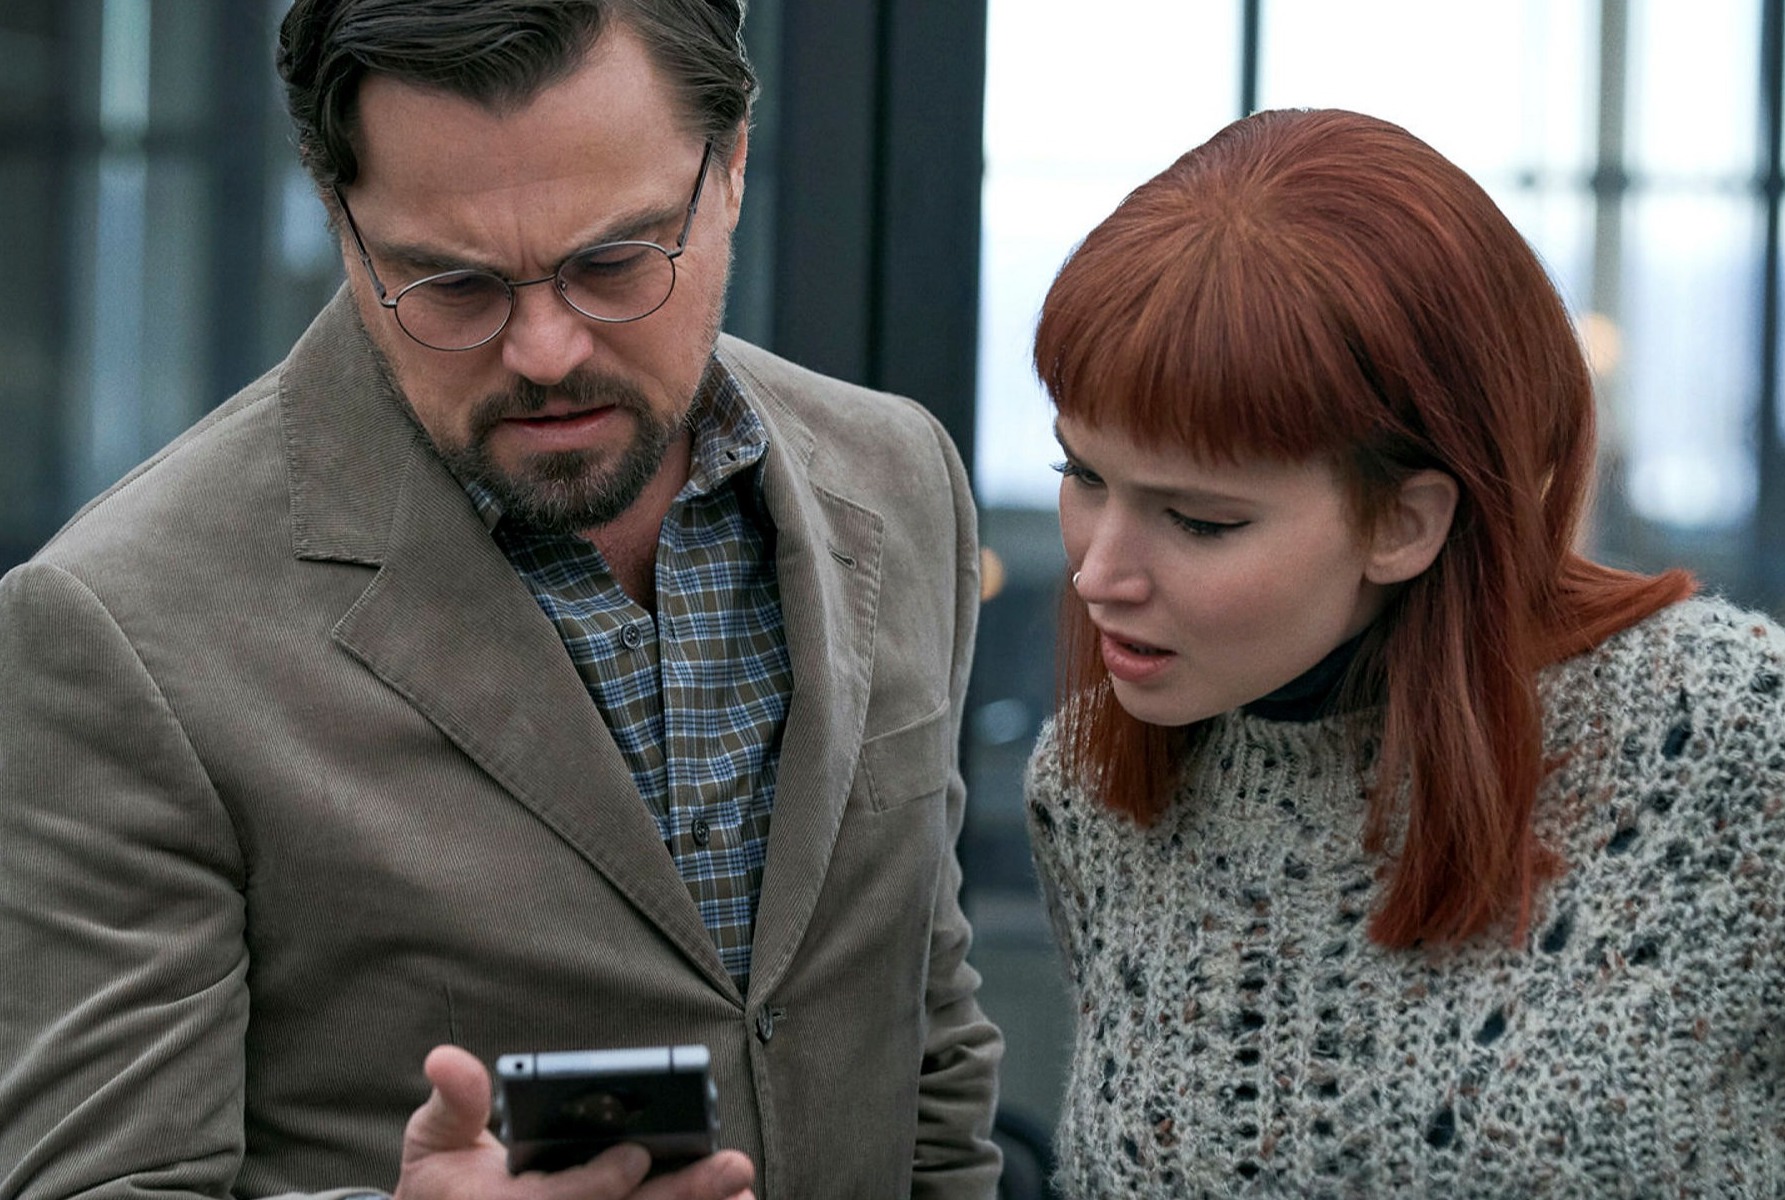 A still of DiCaprio and Lawrence from Netflix's Don't Look Up.